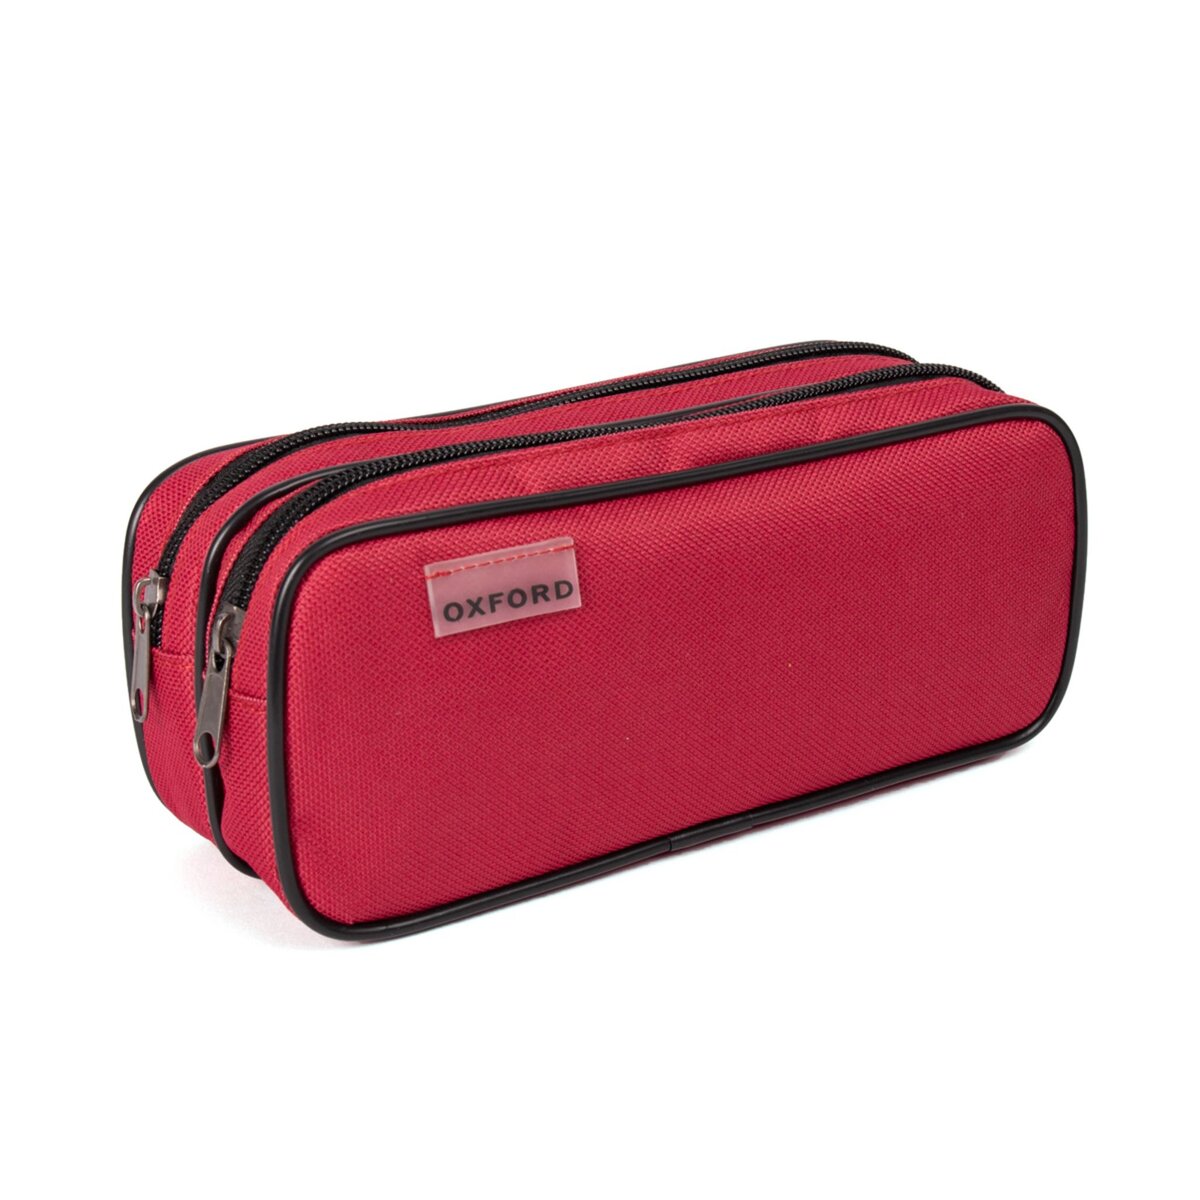 OXFORD Trousse rectangle 2 compartiments rouge